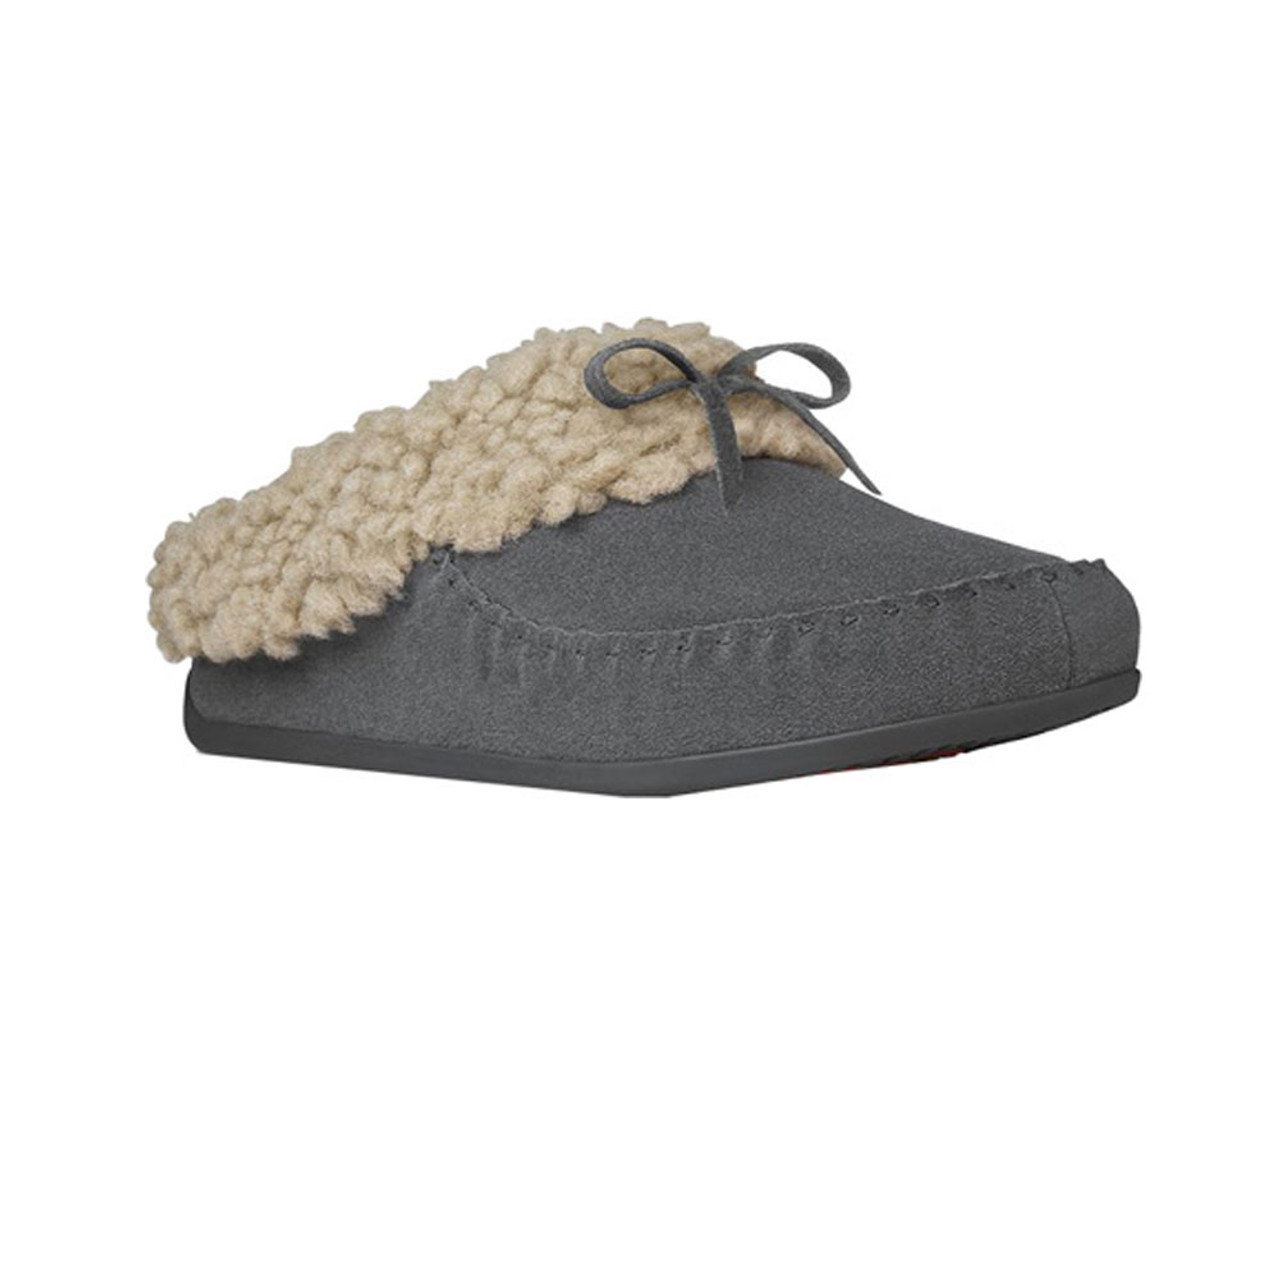 Annoteren Deter persoon Fitflop Women's The Cuddler Snugmoc - Grey | Discount Fitflop Ladies  Slippers & More - Shoolu.com | Shoolu.com